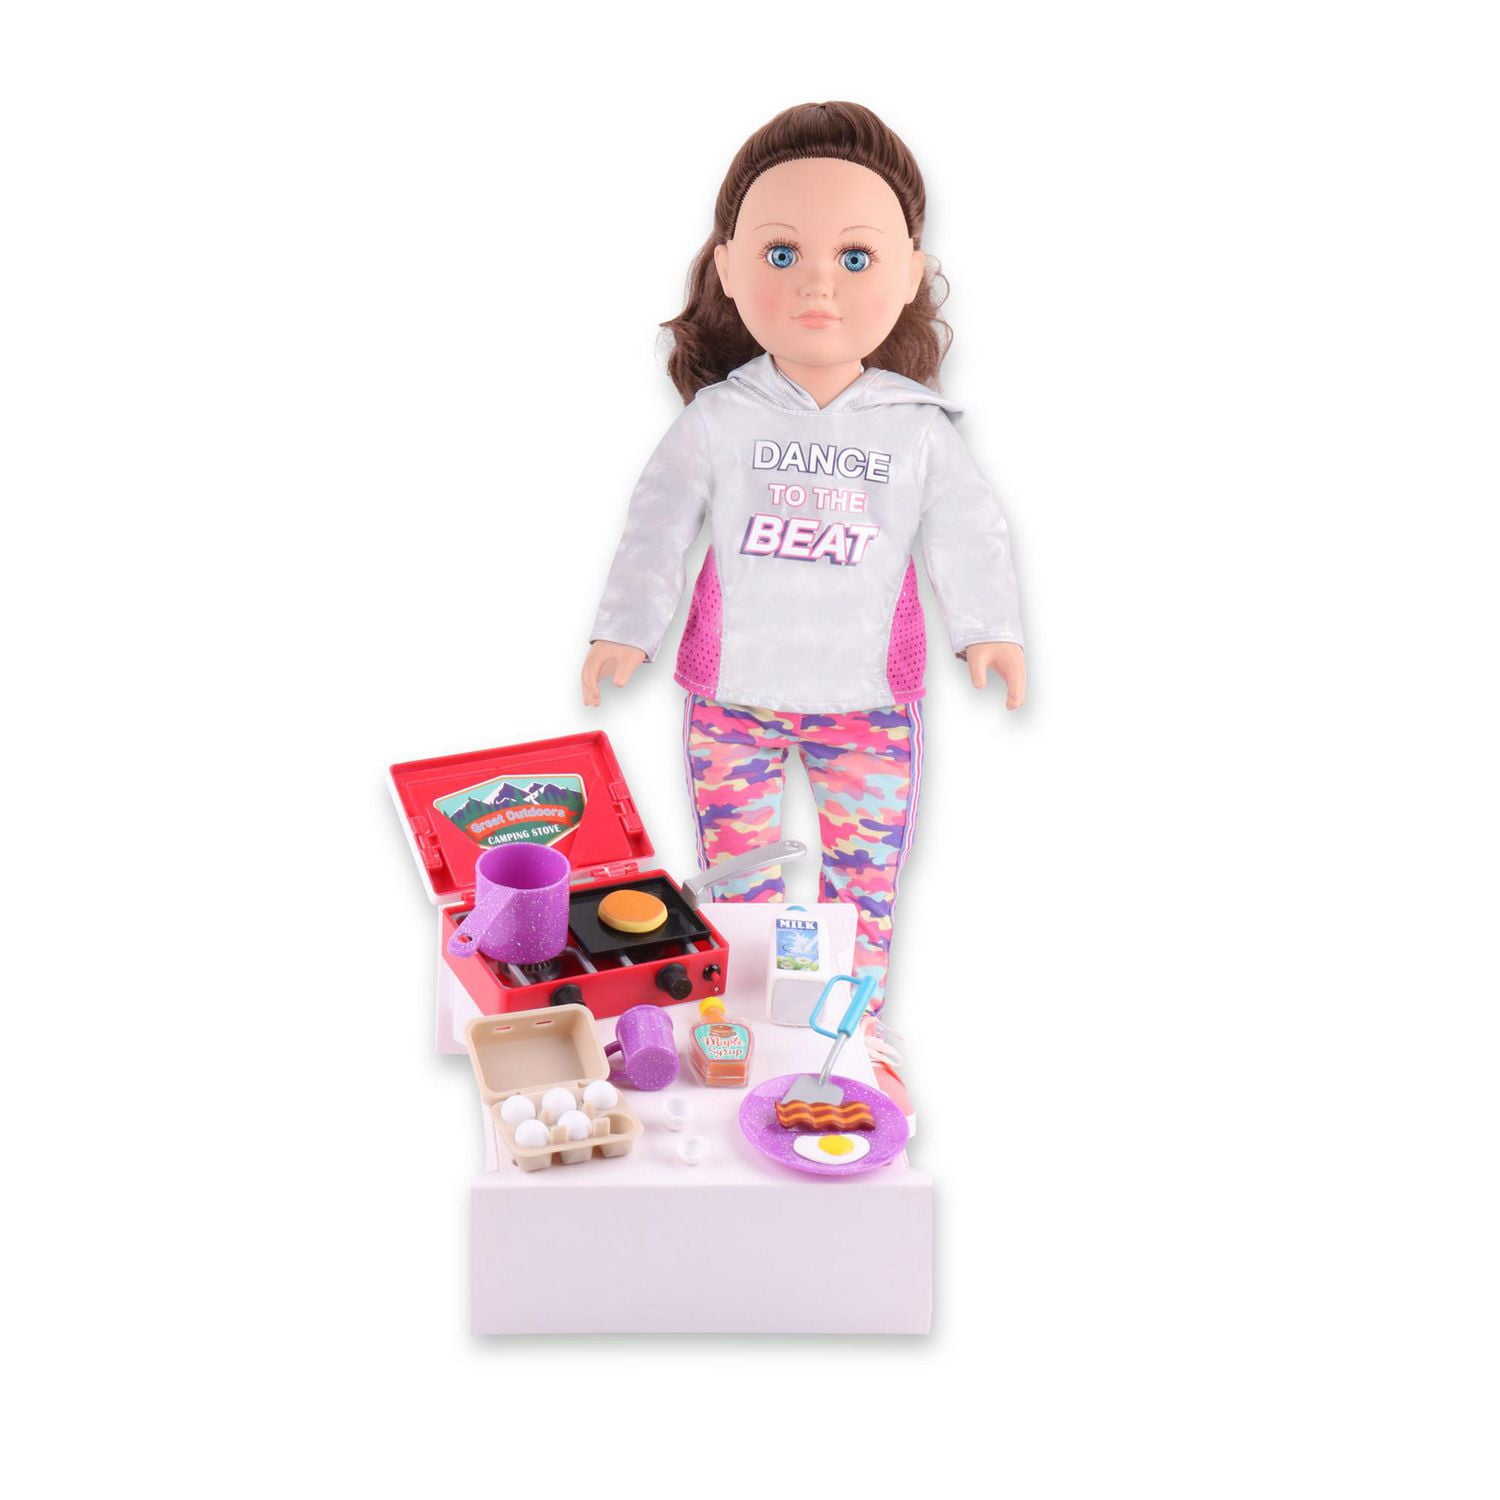 My Life As School Accessories Play Set For 18 Dolls